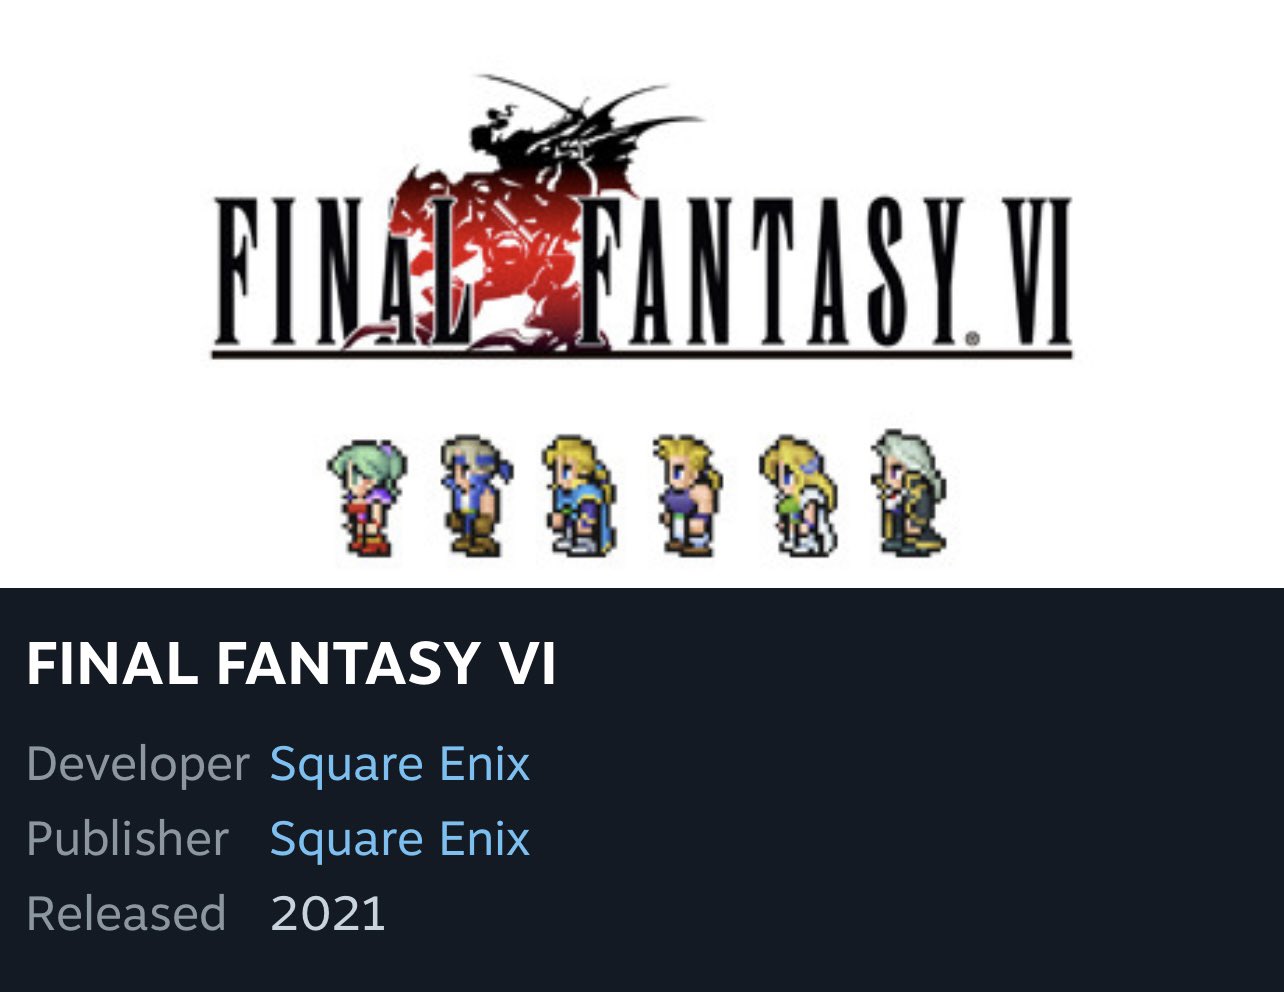 FINAL FANTASY on X: This isn't just another wild goose chase, it's time to  move out. The Final Fantasy VI pixel remaster launches on Steam and Mobile  on February 23rd PST/GMT. In